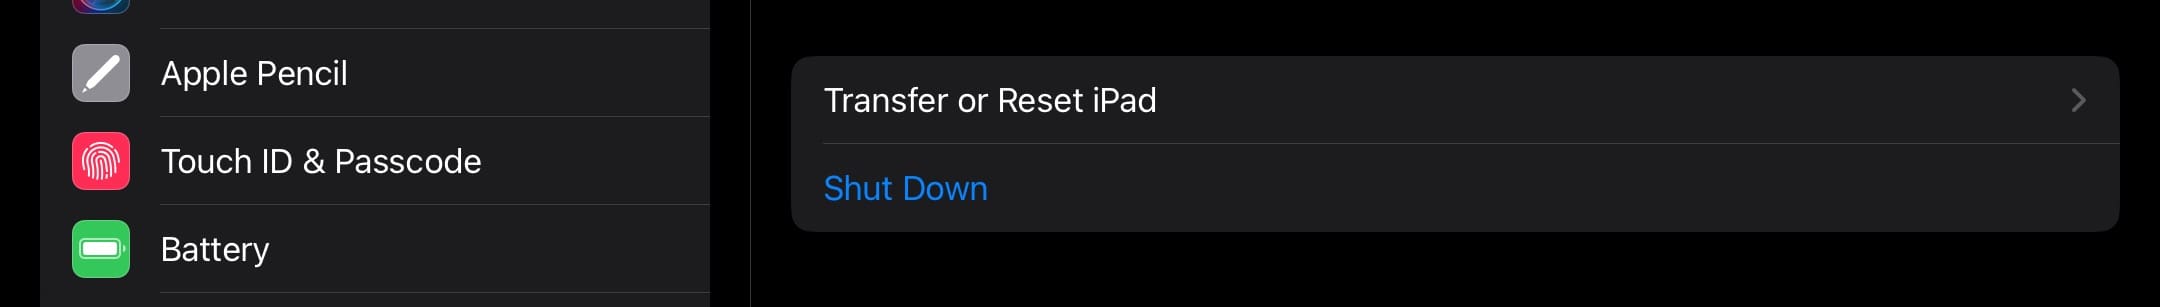 Transfer or Reset iPad option in Settings 